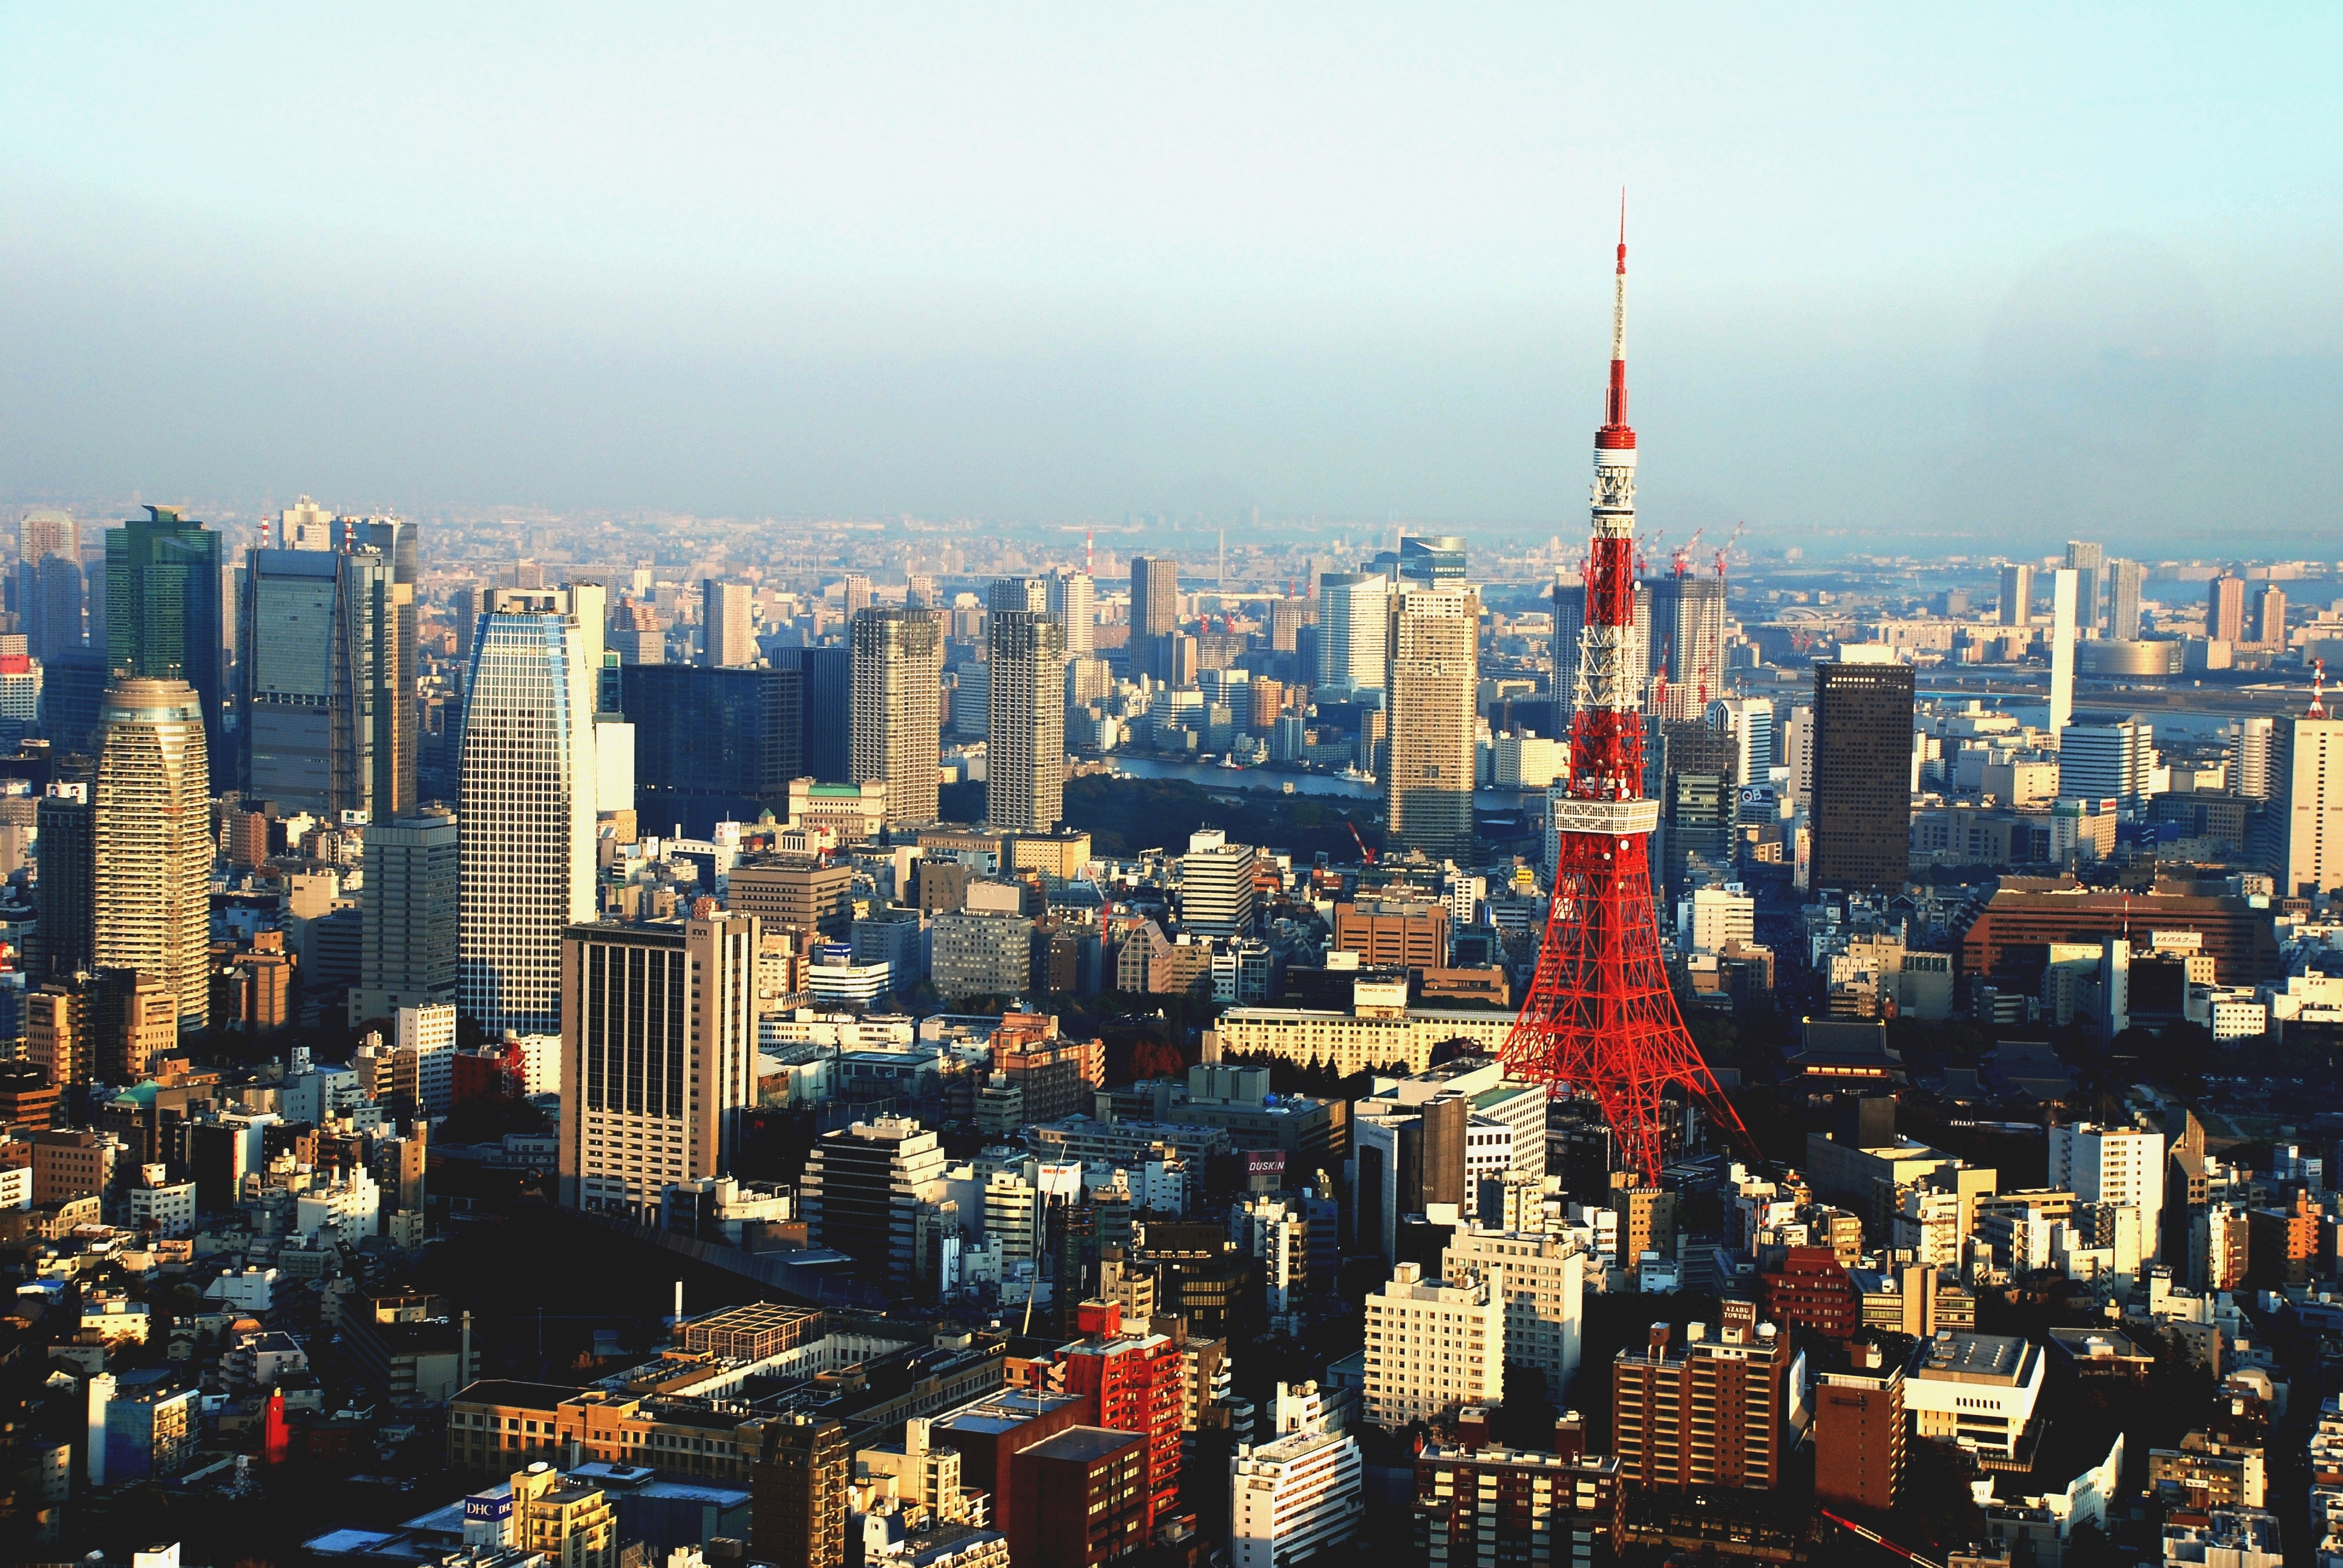 Work off those Christmas calories with a Tokyo Tower Climb